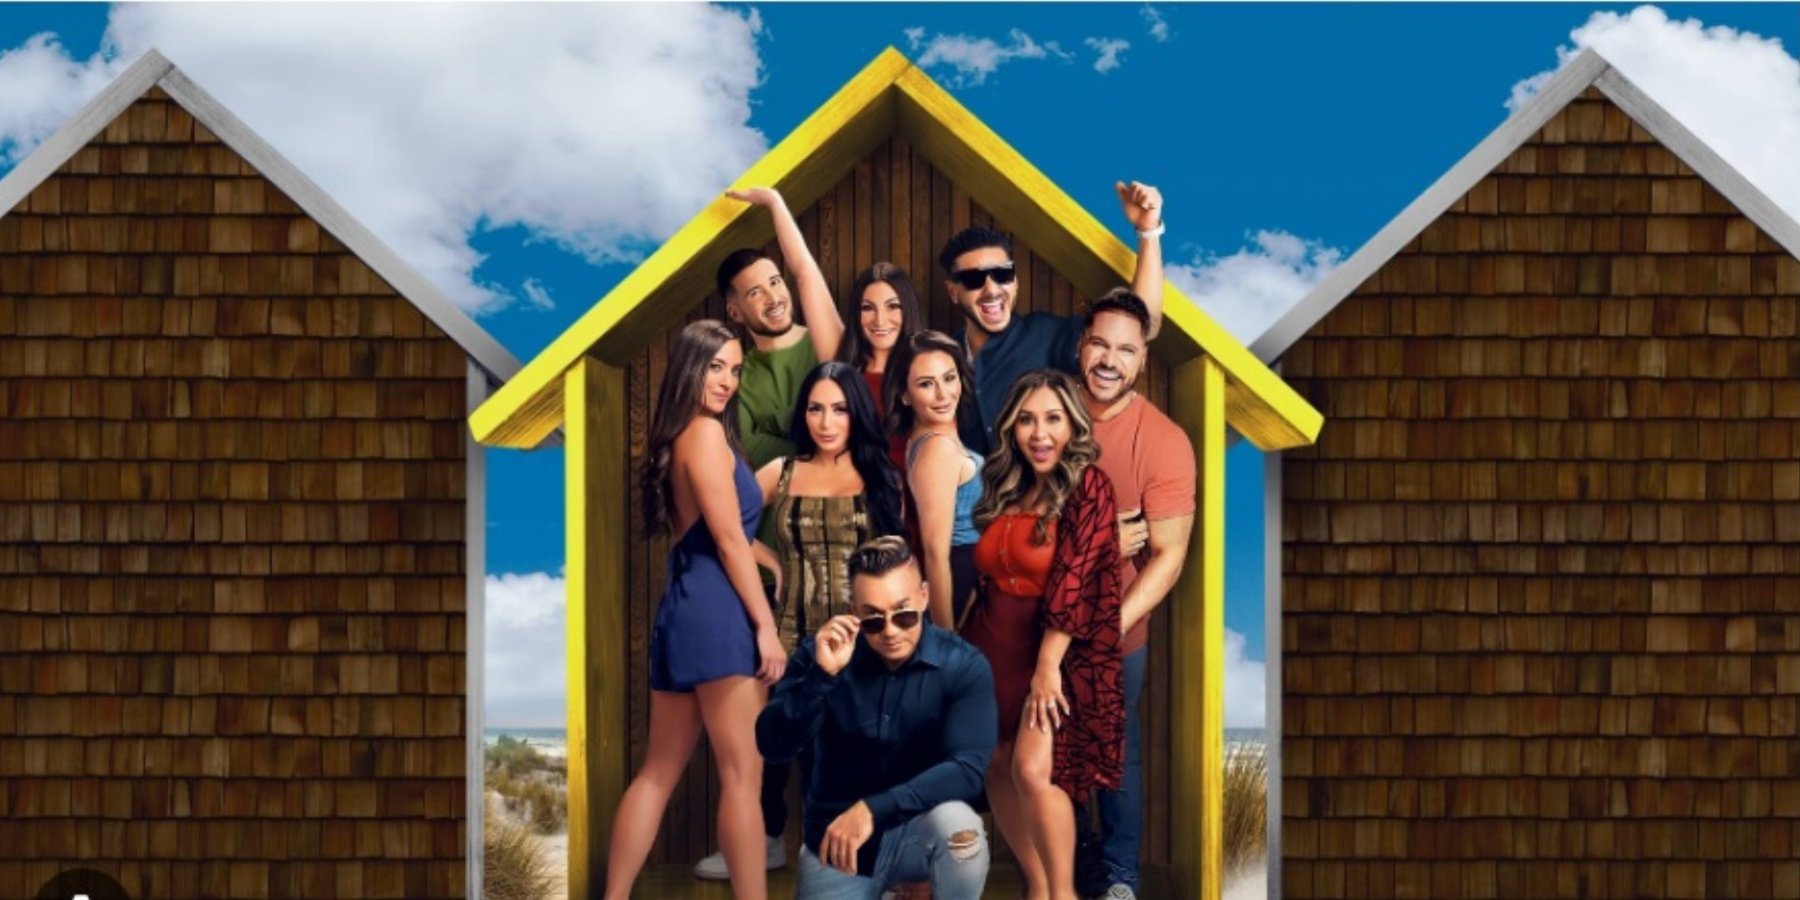 The 'Jersey Shore: Family Vacation' cast